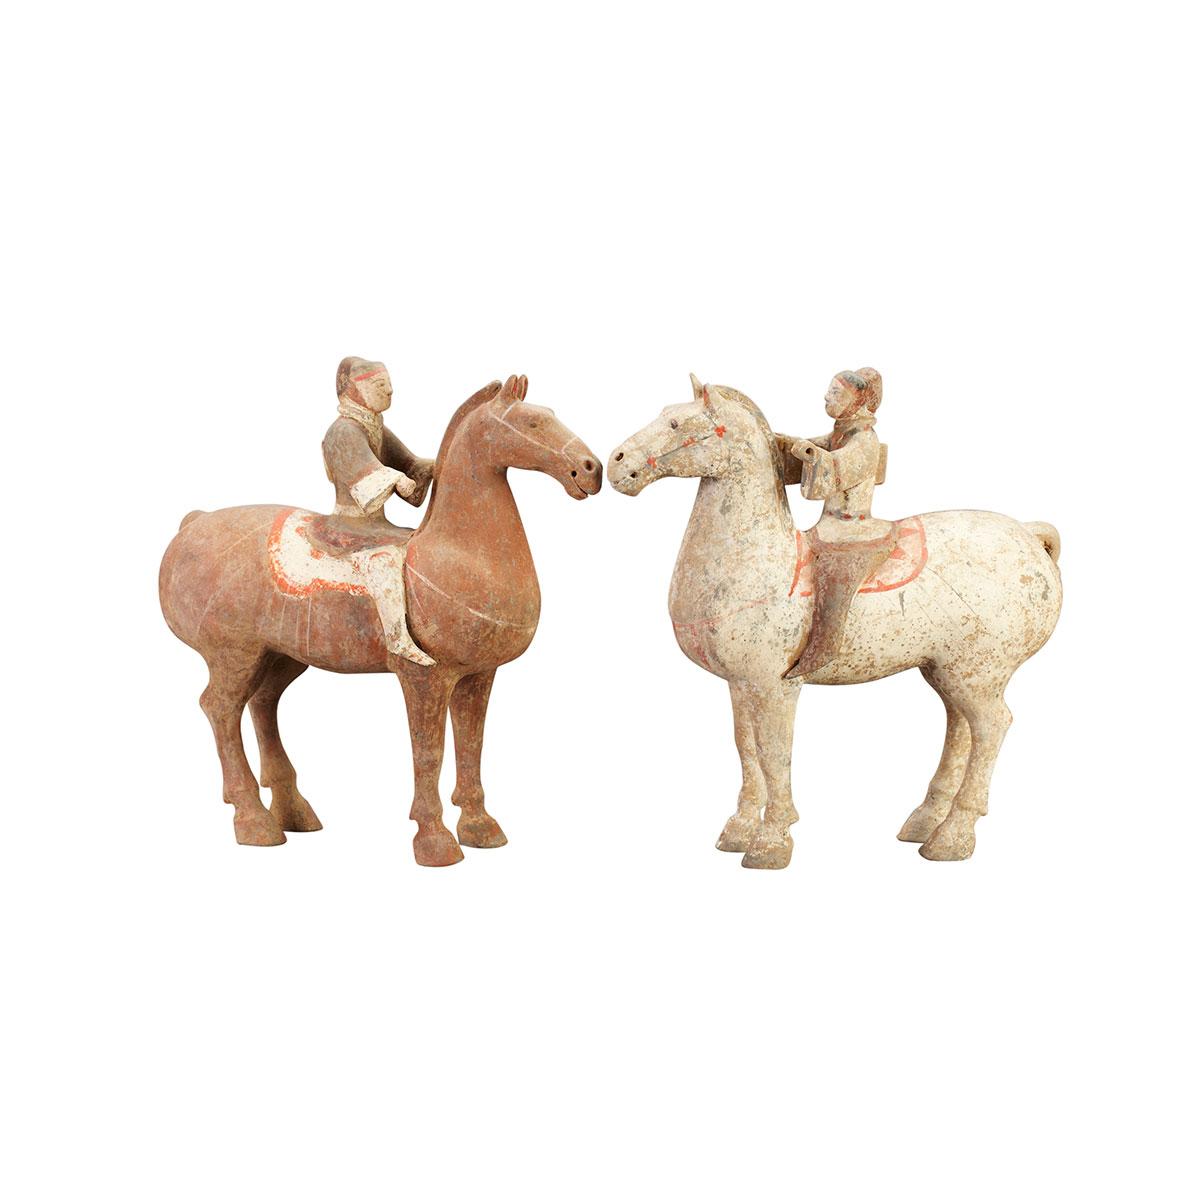 Pair of Painted Pottery Horses and Riders, Han Dynasty (206 BC - 220 AD)